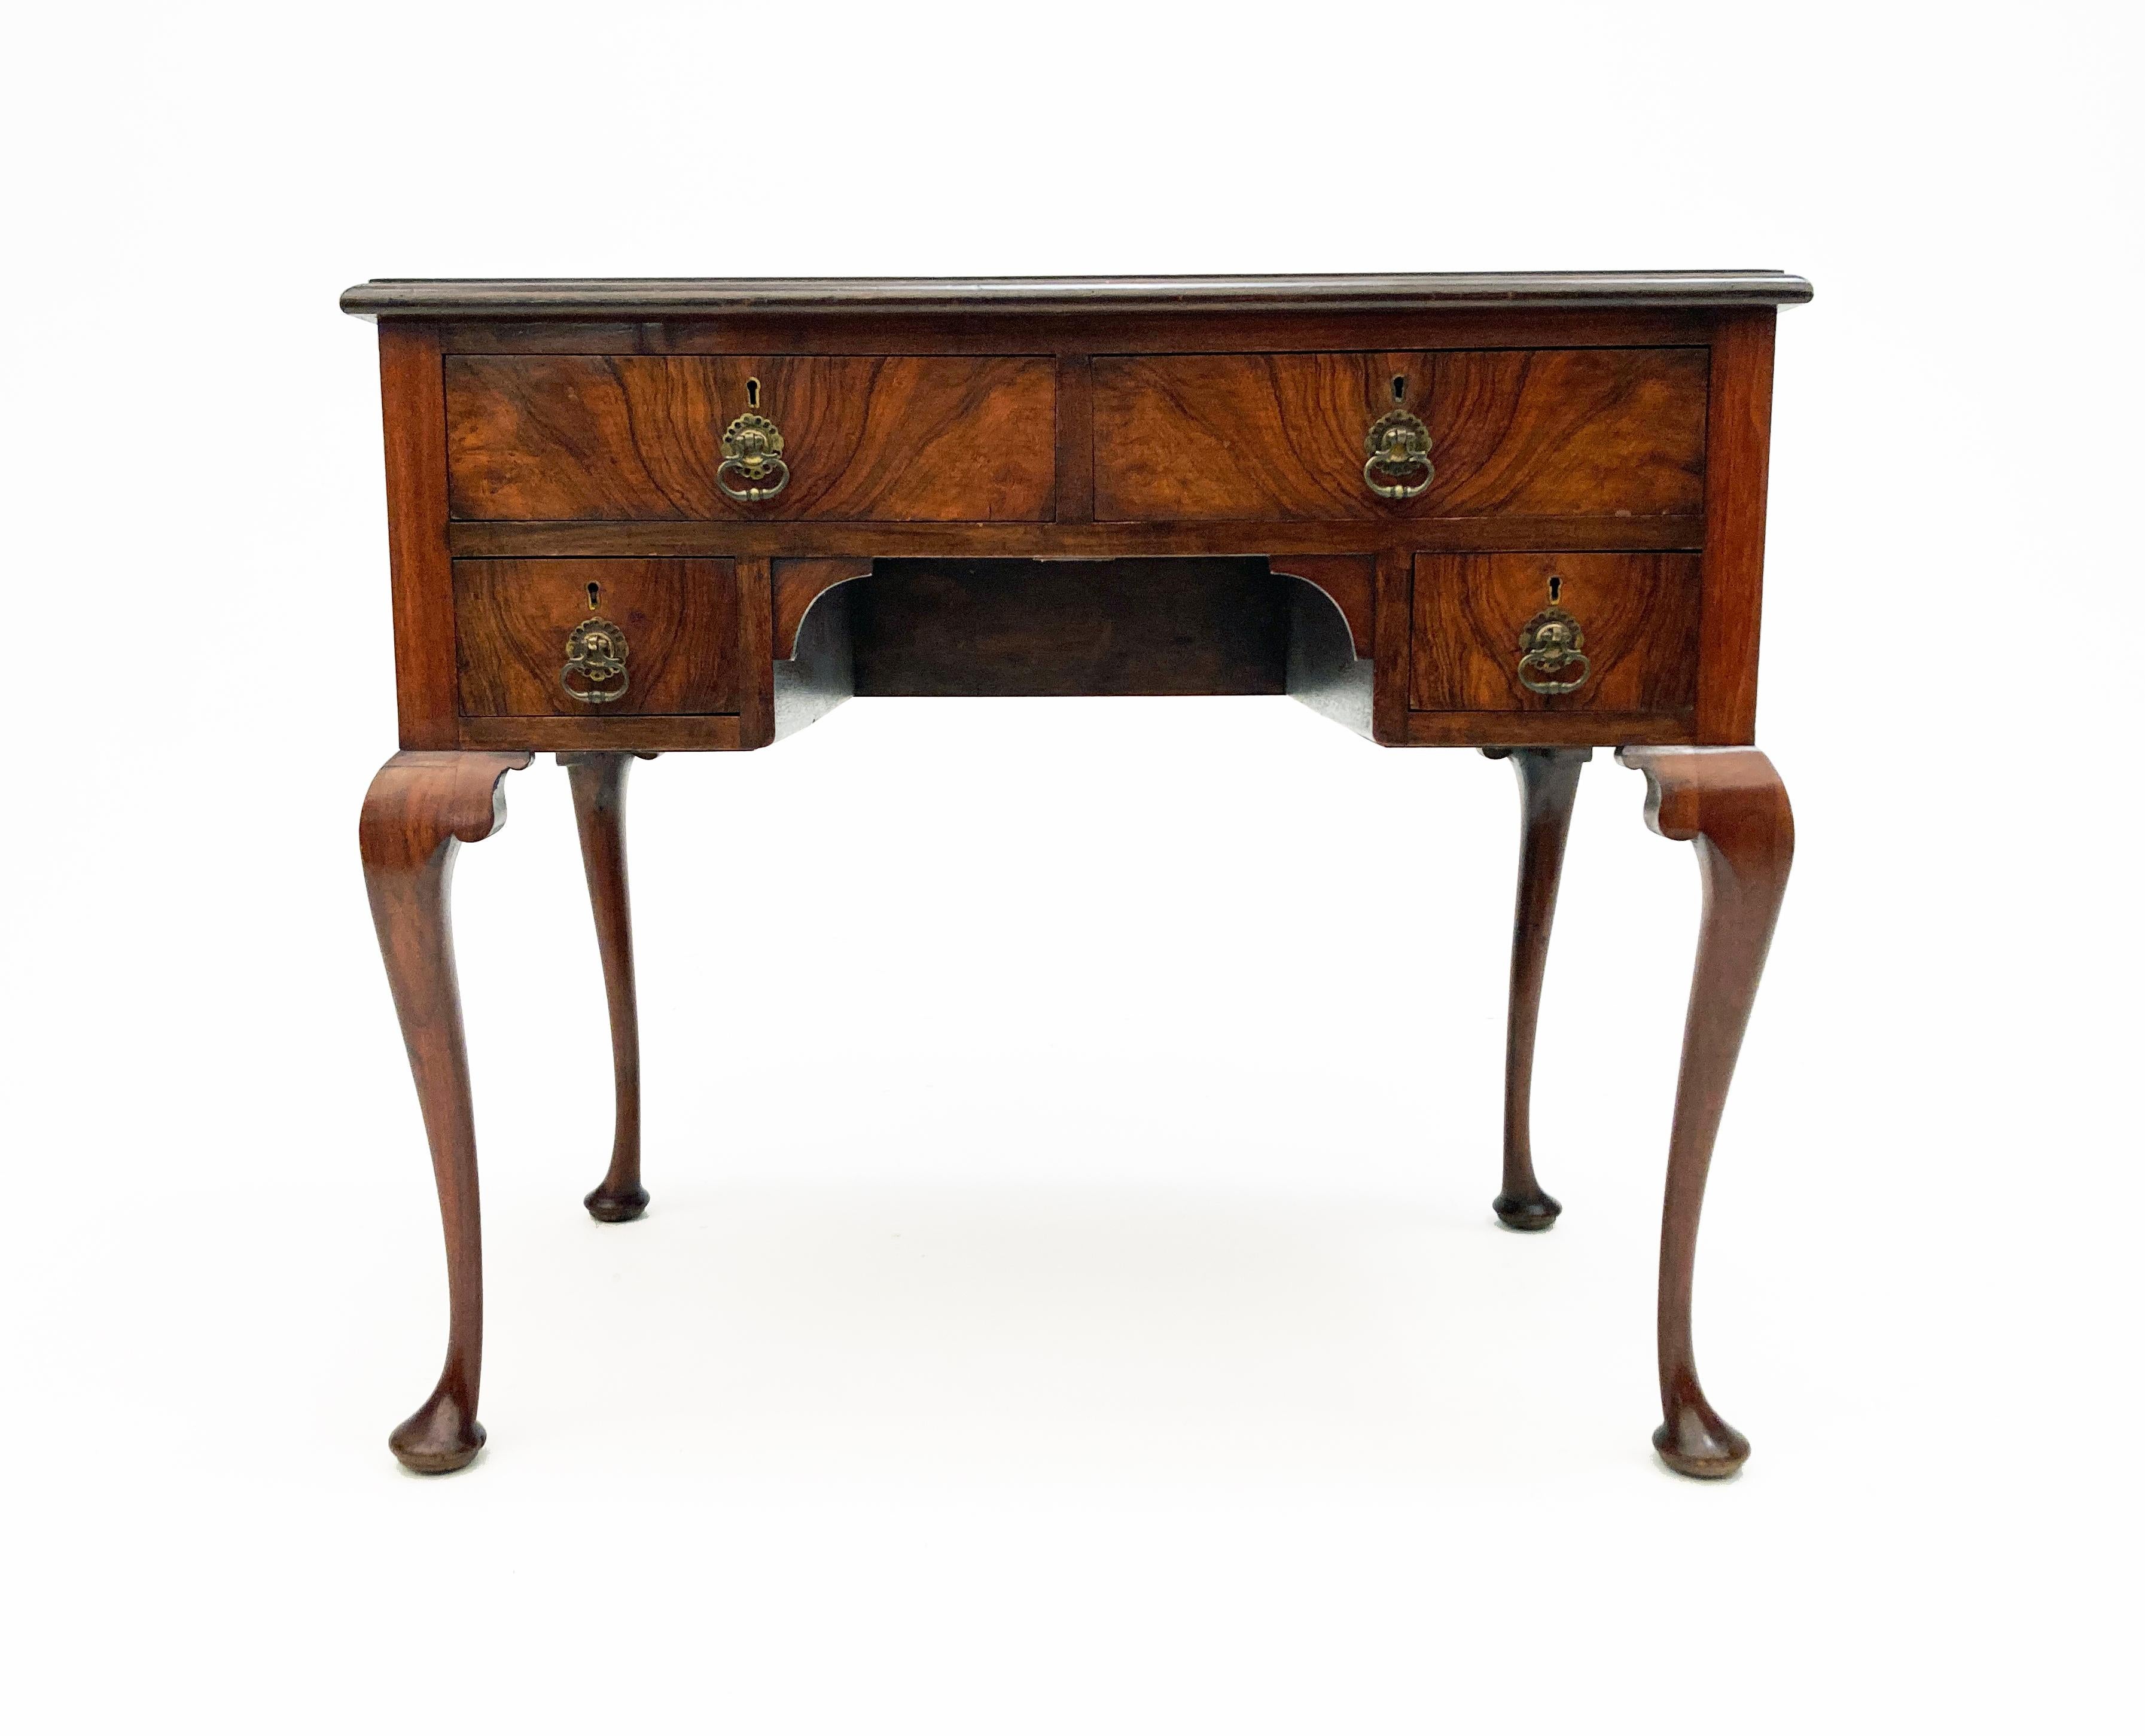 Hand-Crafted 19th Century Georgian Period English Flame Mahogany Lowboy/Side Table For Sale